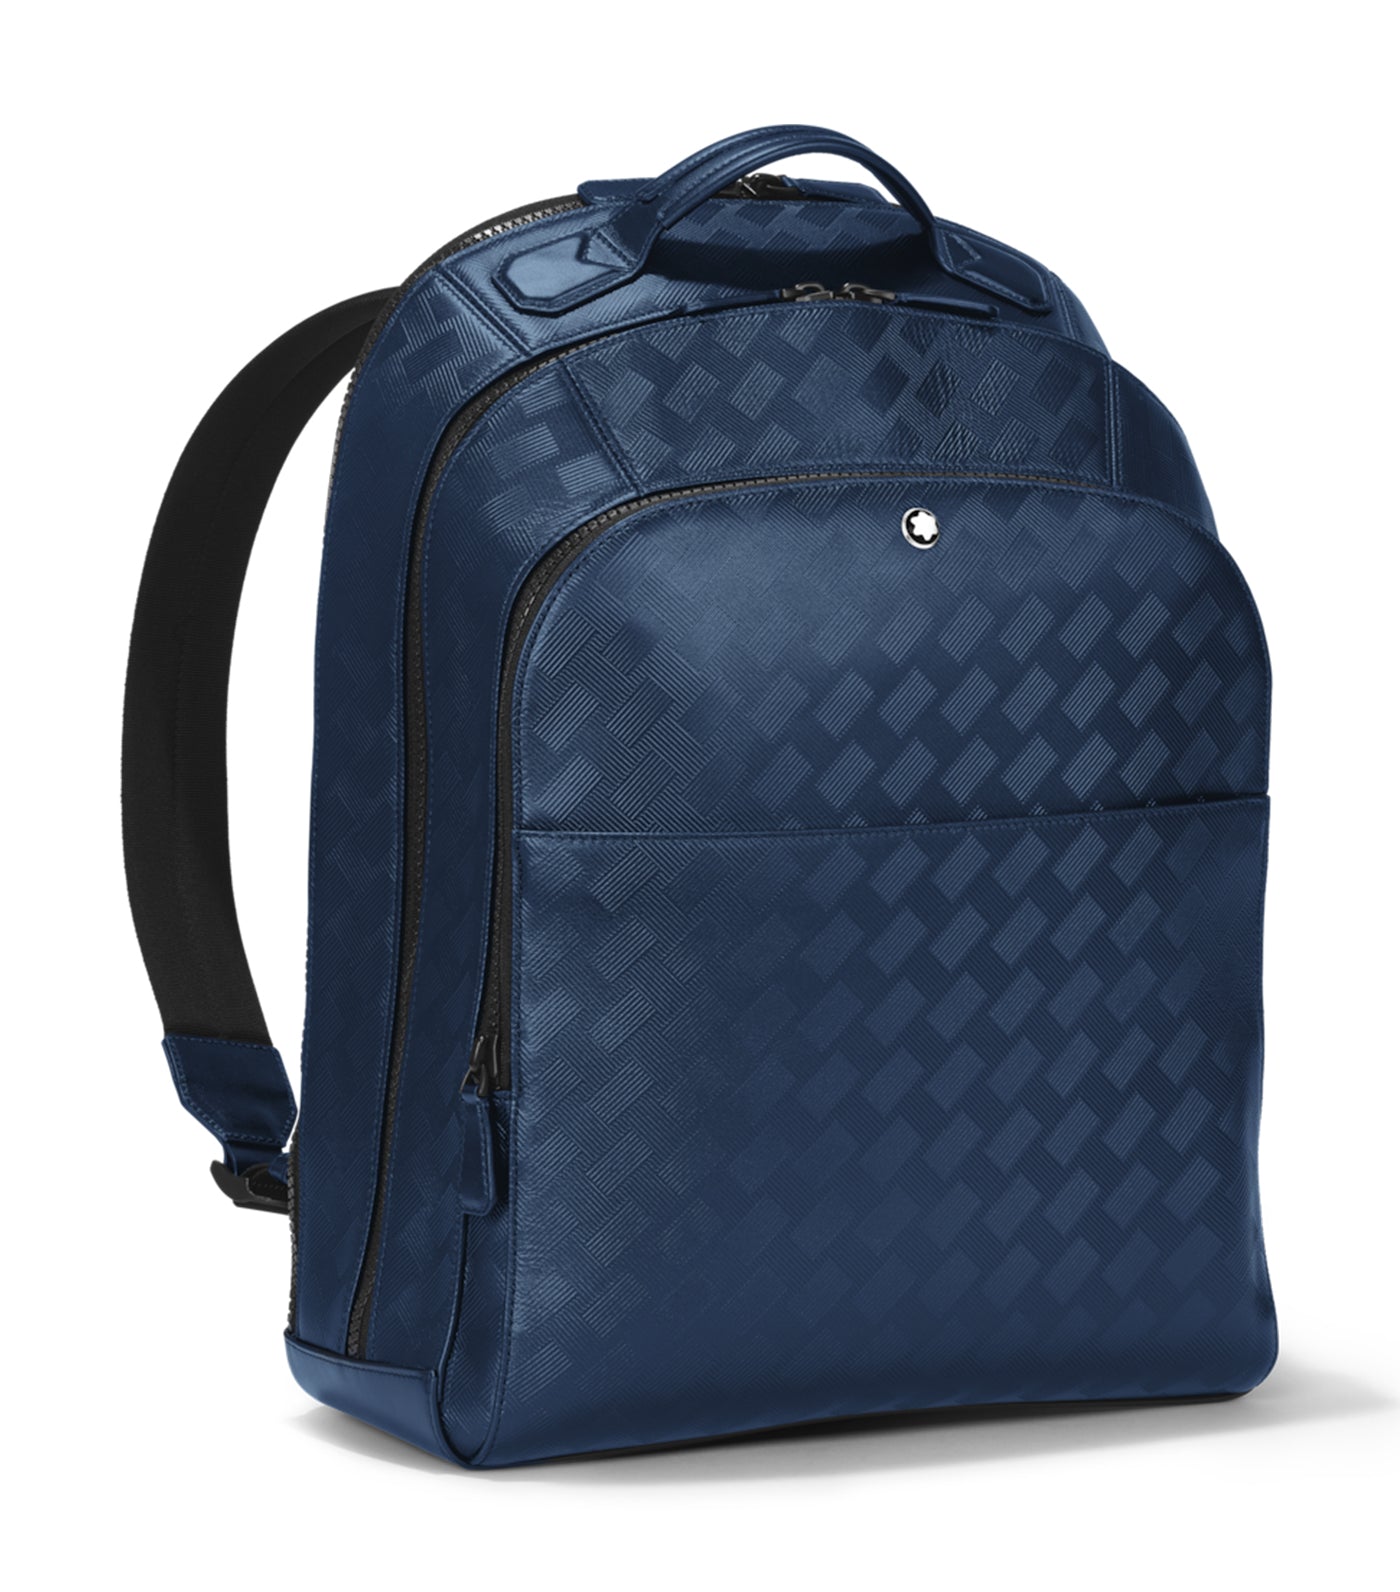 Extreme 3.0 Large Backpack 3 Compartments Blue